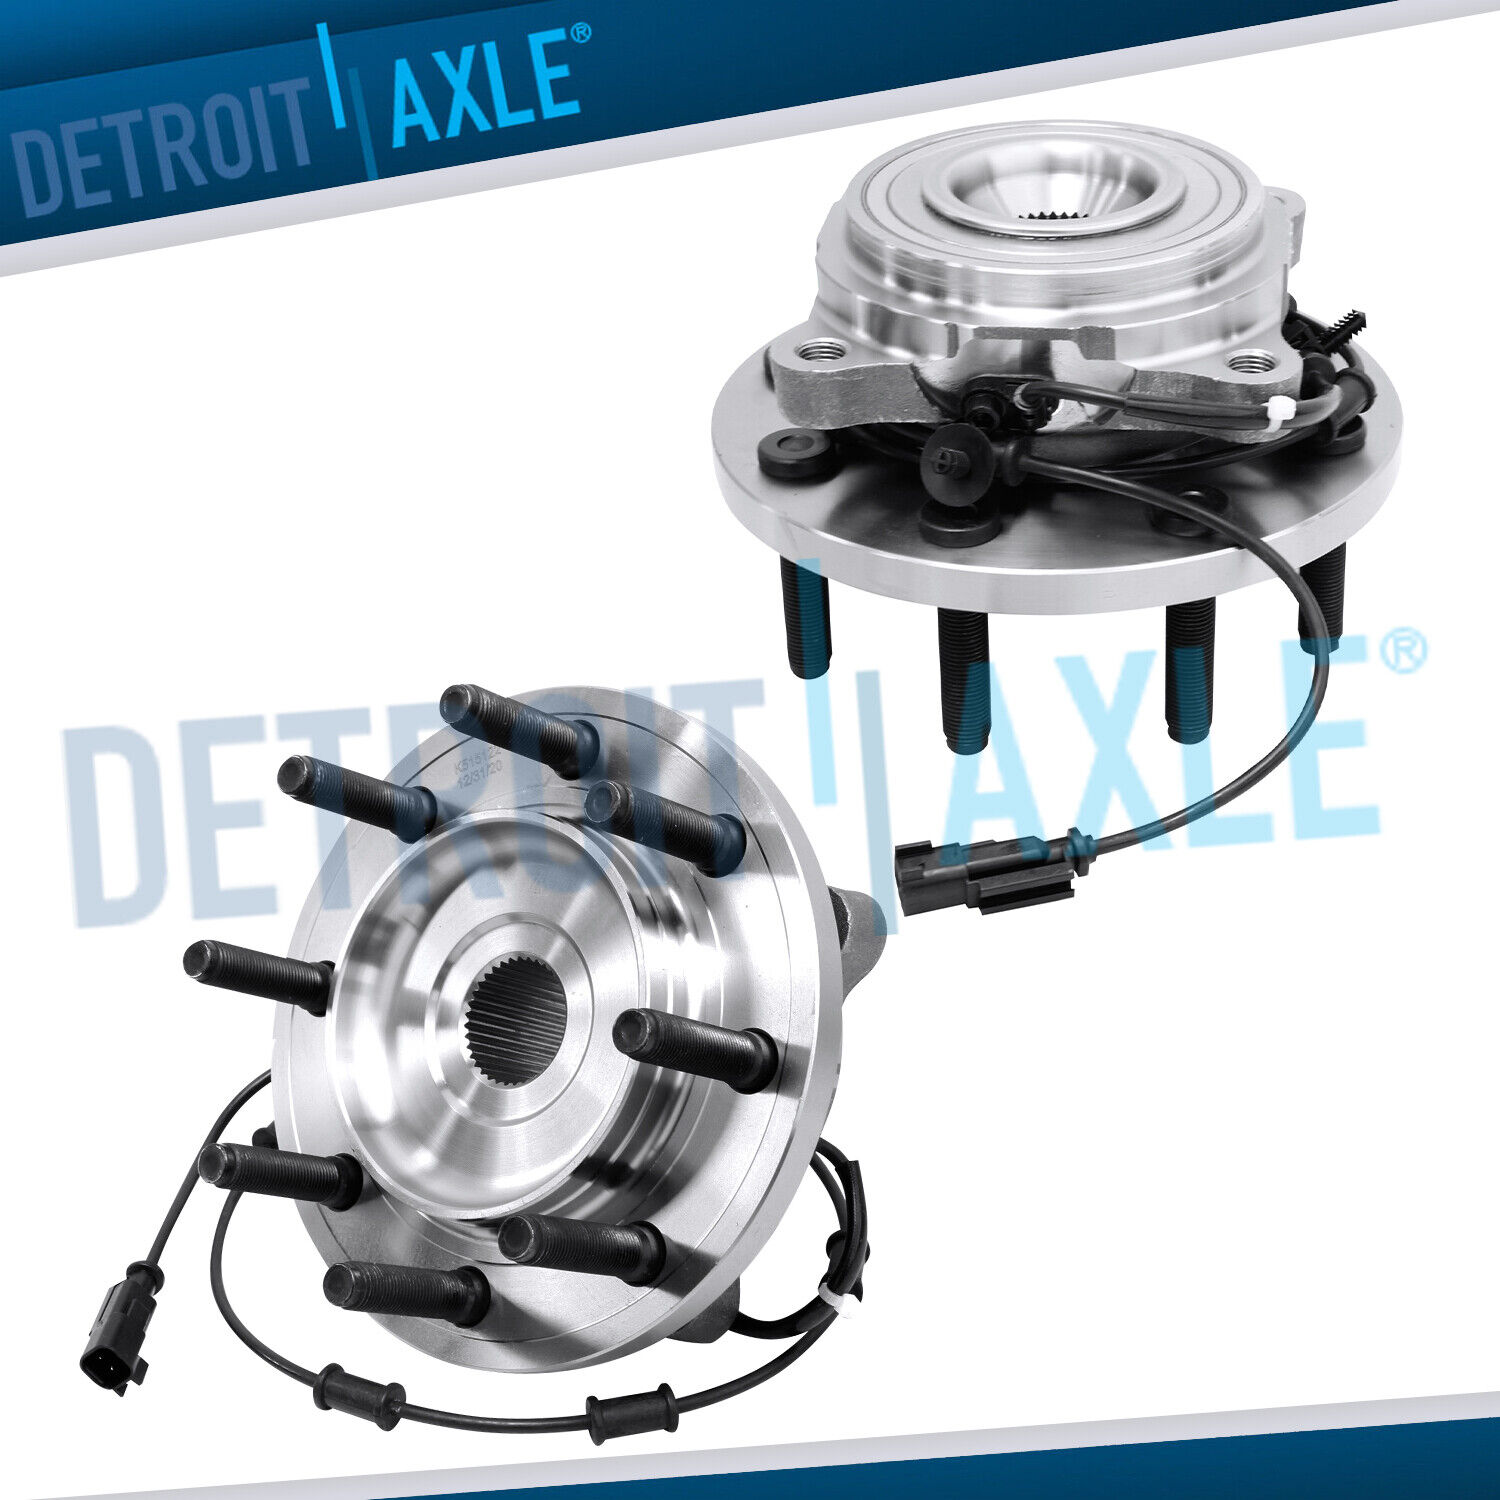 4WD Pair Front Wheel Bearing Hubs for 2009 2010 2011 Dodge Ram 2500 3500 w/ ABS